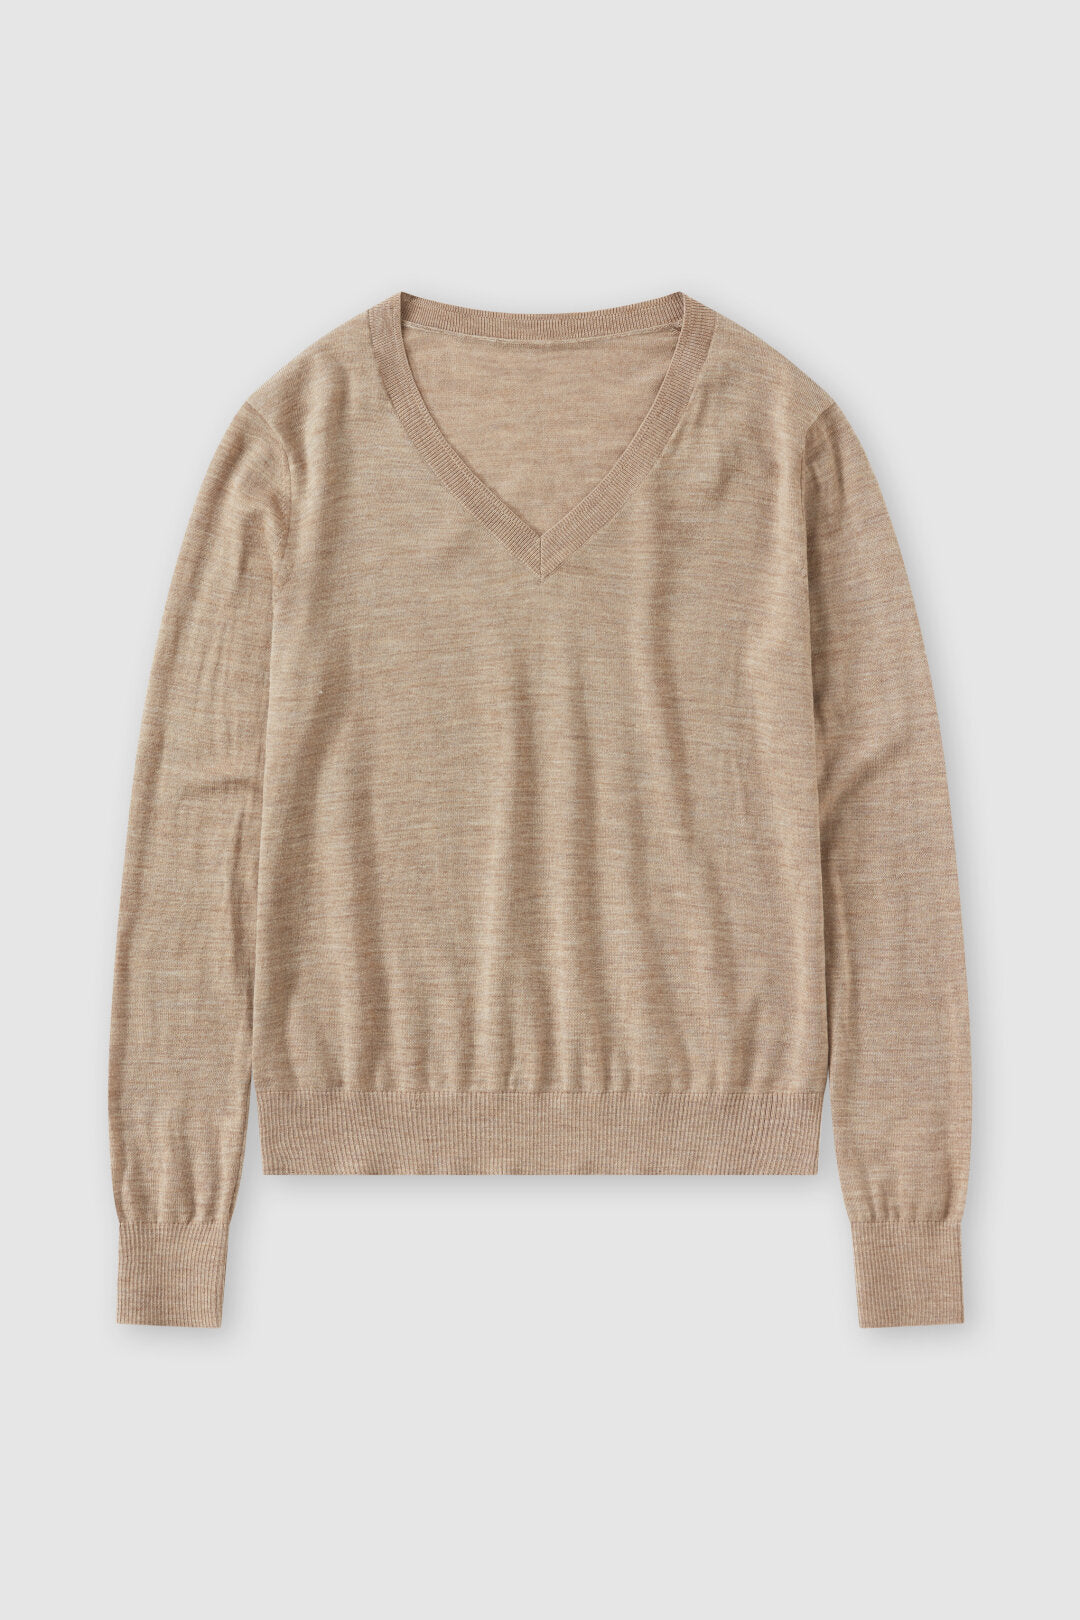 Closed Sweater Woman V-neck Long Sleeve Brown Sugar